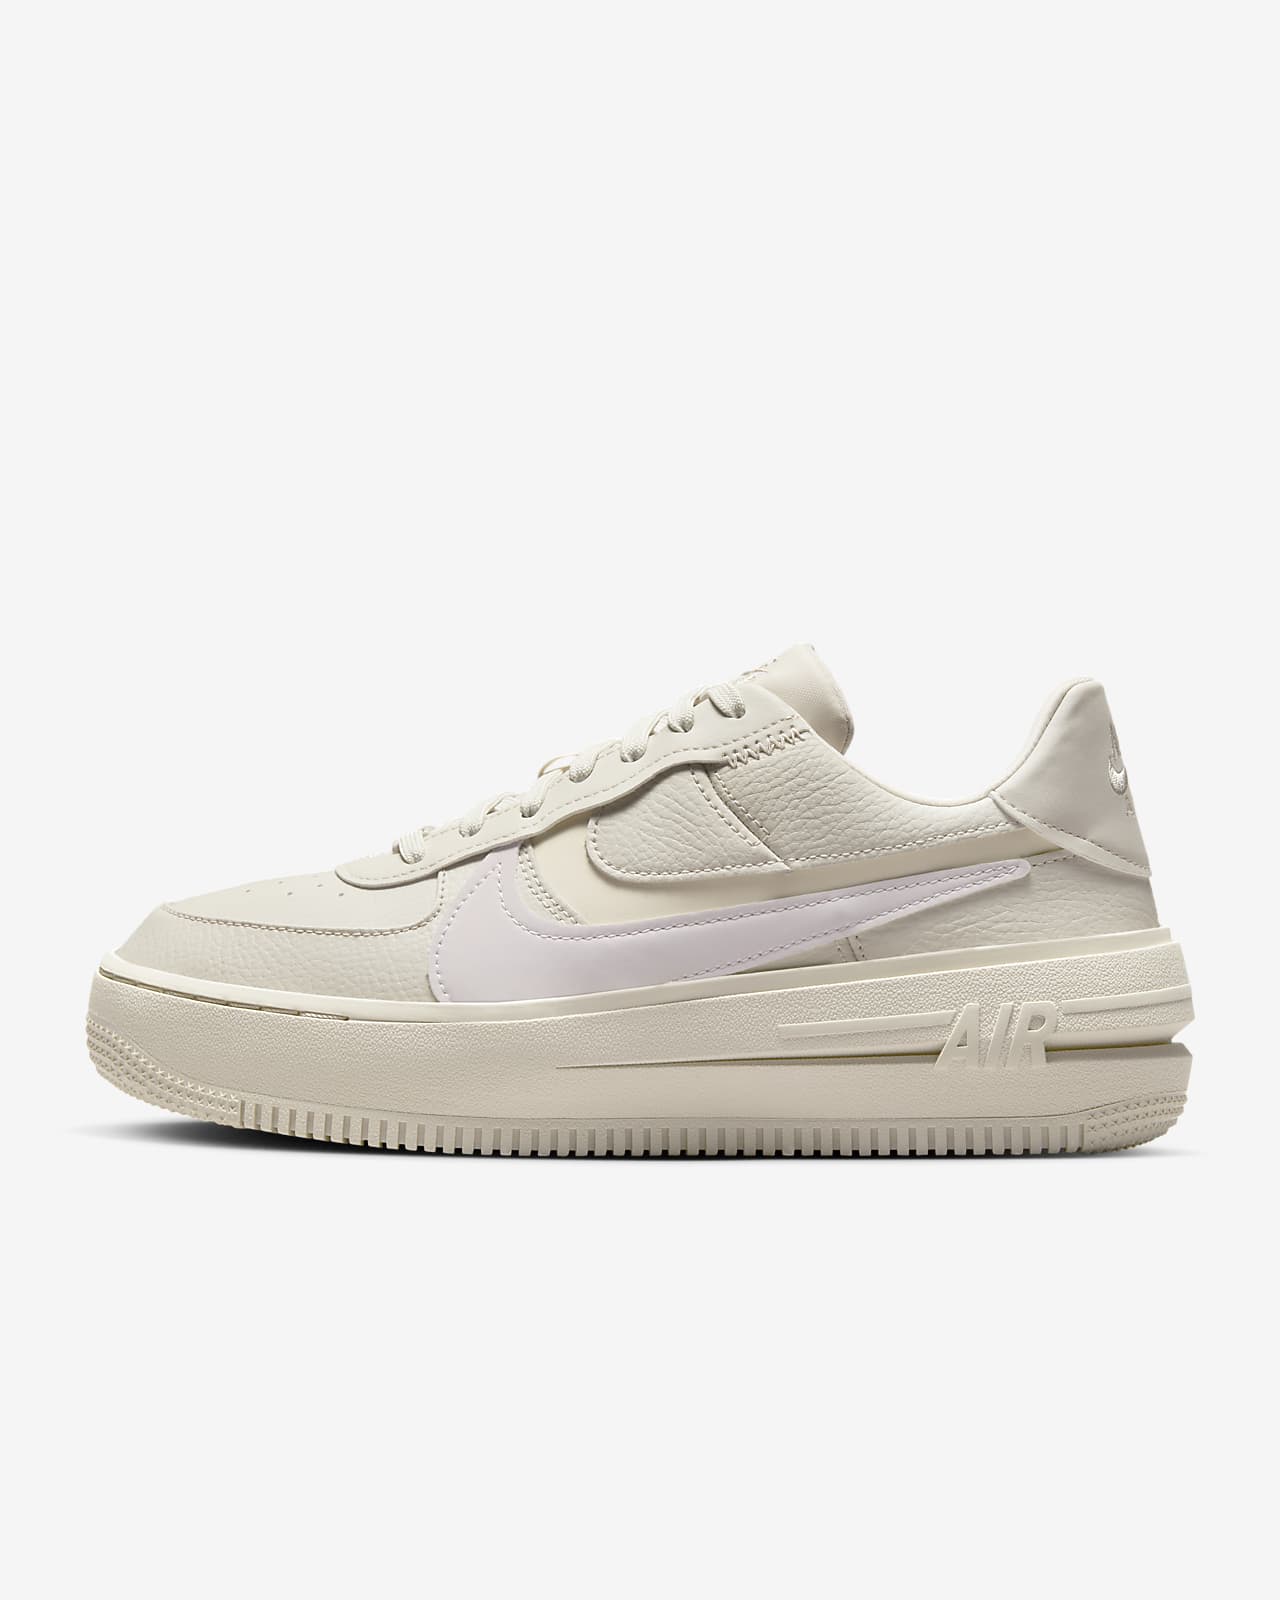 Chaussures Nike Air Force 1 PLT.AF.ORM pour Femme